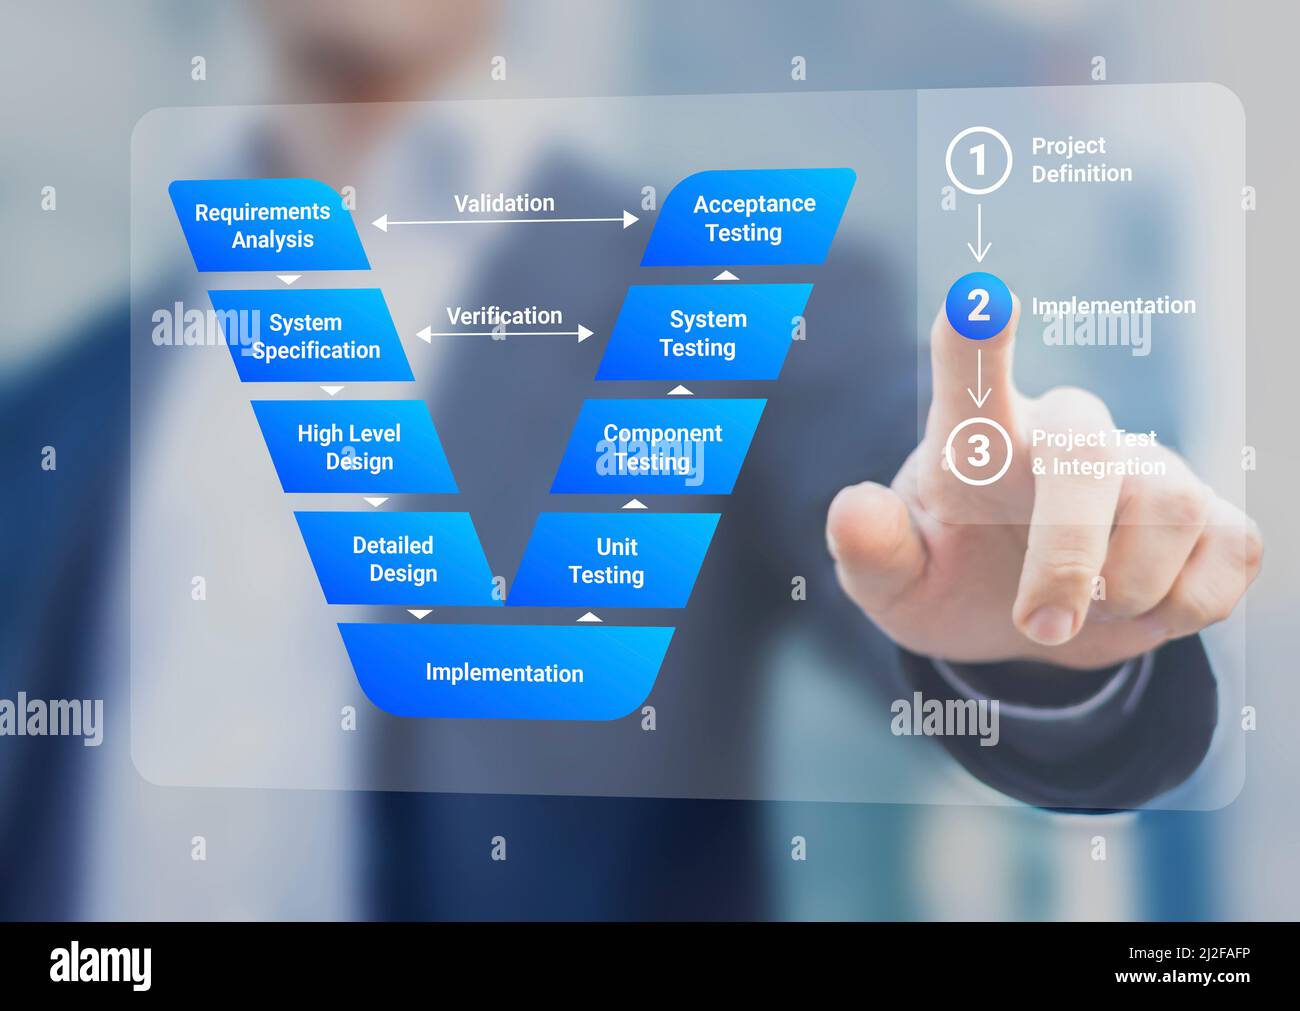 V-Model system and software development lifecycle methodology. Project management process from design, implementation to integration and test phase. Stock Photo